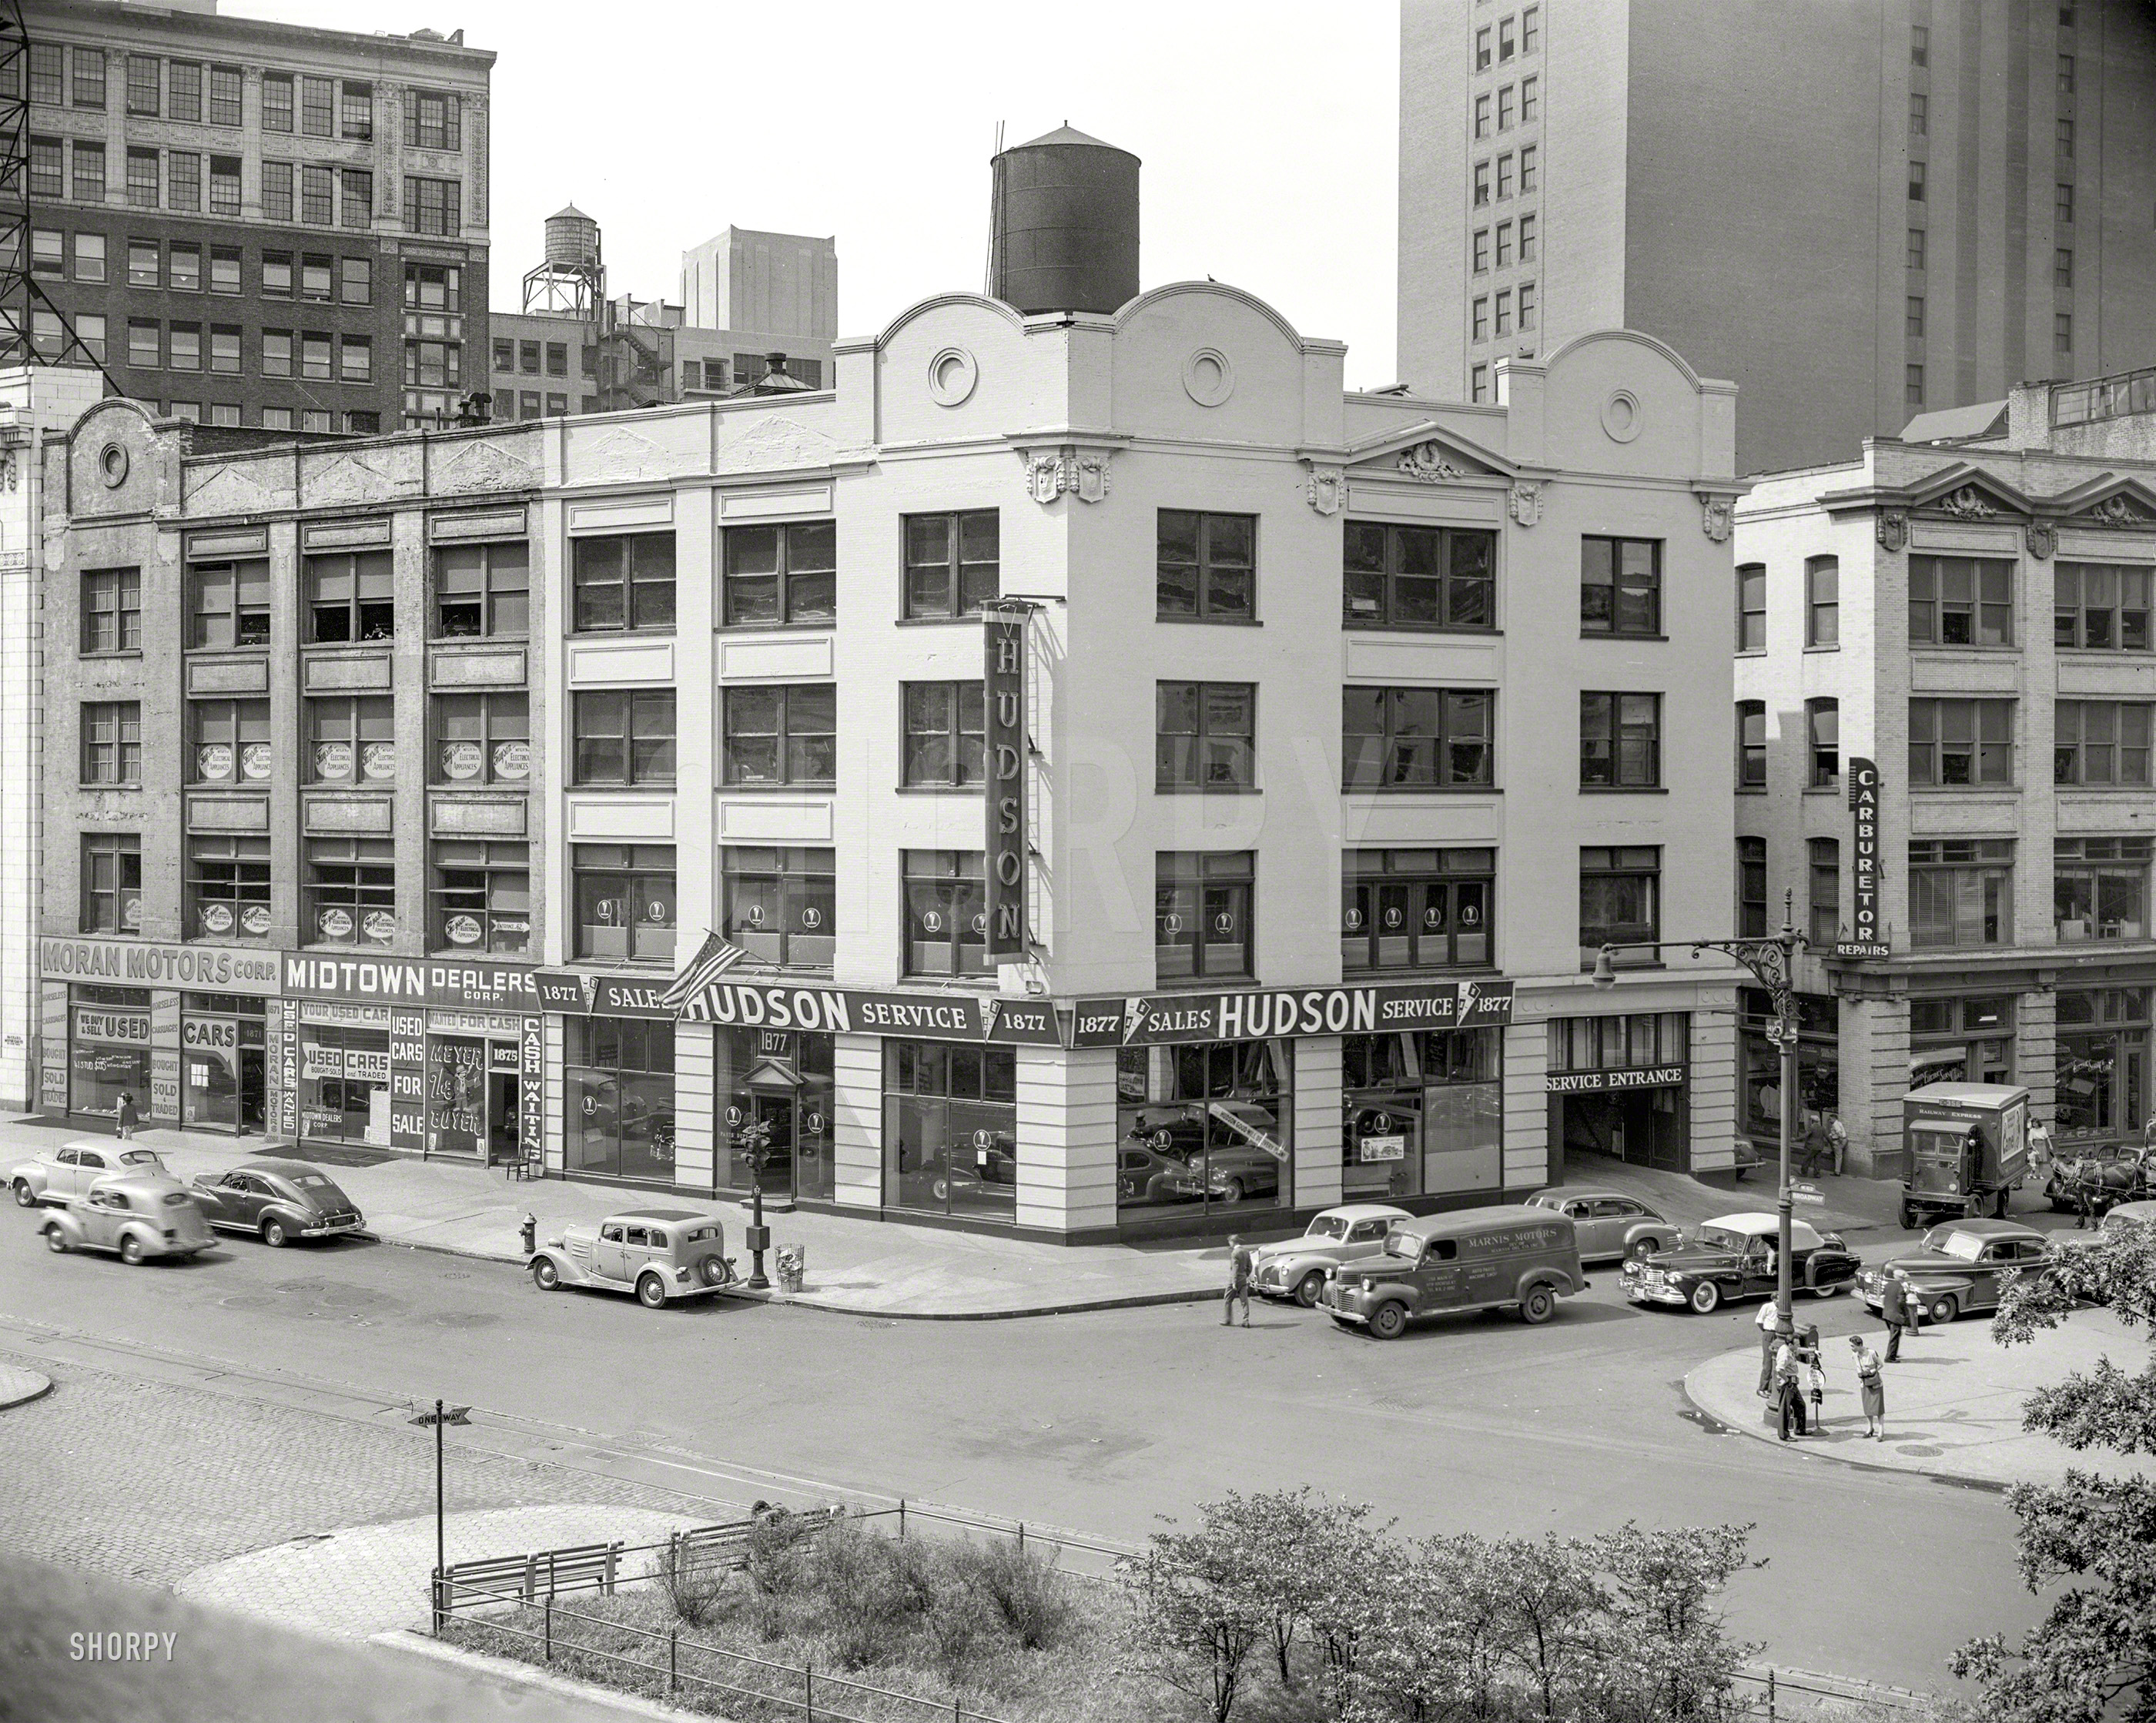 New York circa 1947. "Midtown Dealers Corp. and Hudson showroom, Broadway at W. 62nd Street." Home of "Meyer the Buyer" and your Hudson Headquarters. Our latest 4x5 negative from the prolific but obscure John M. Fox. View full size.